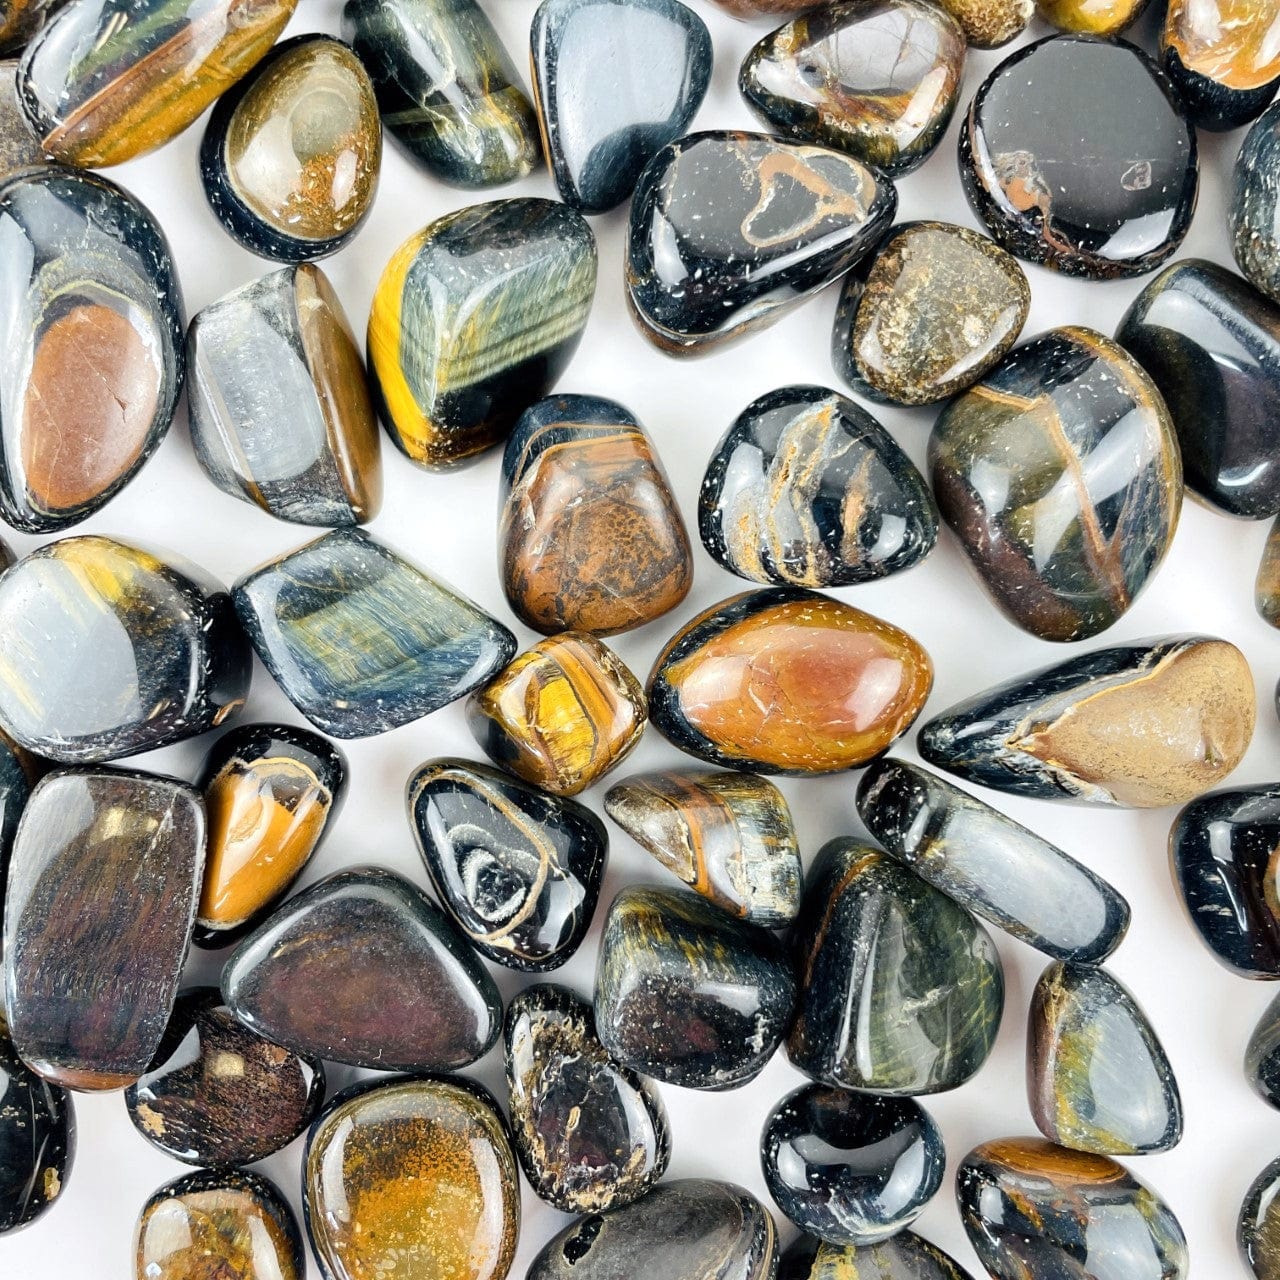 Blue Tigers Eye Polished Stones  spread out on a table